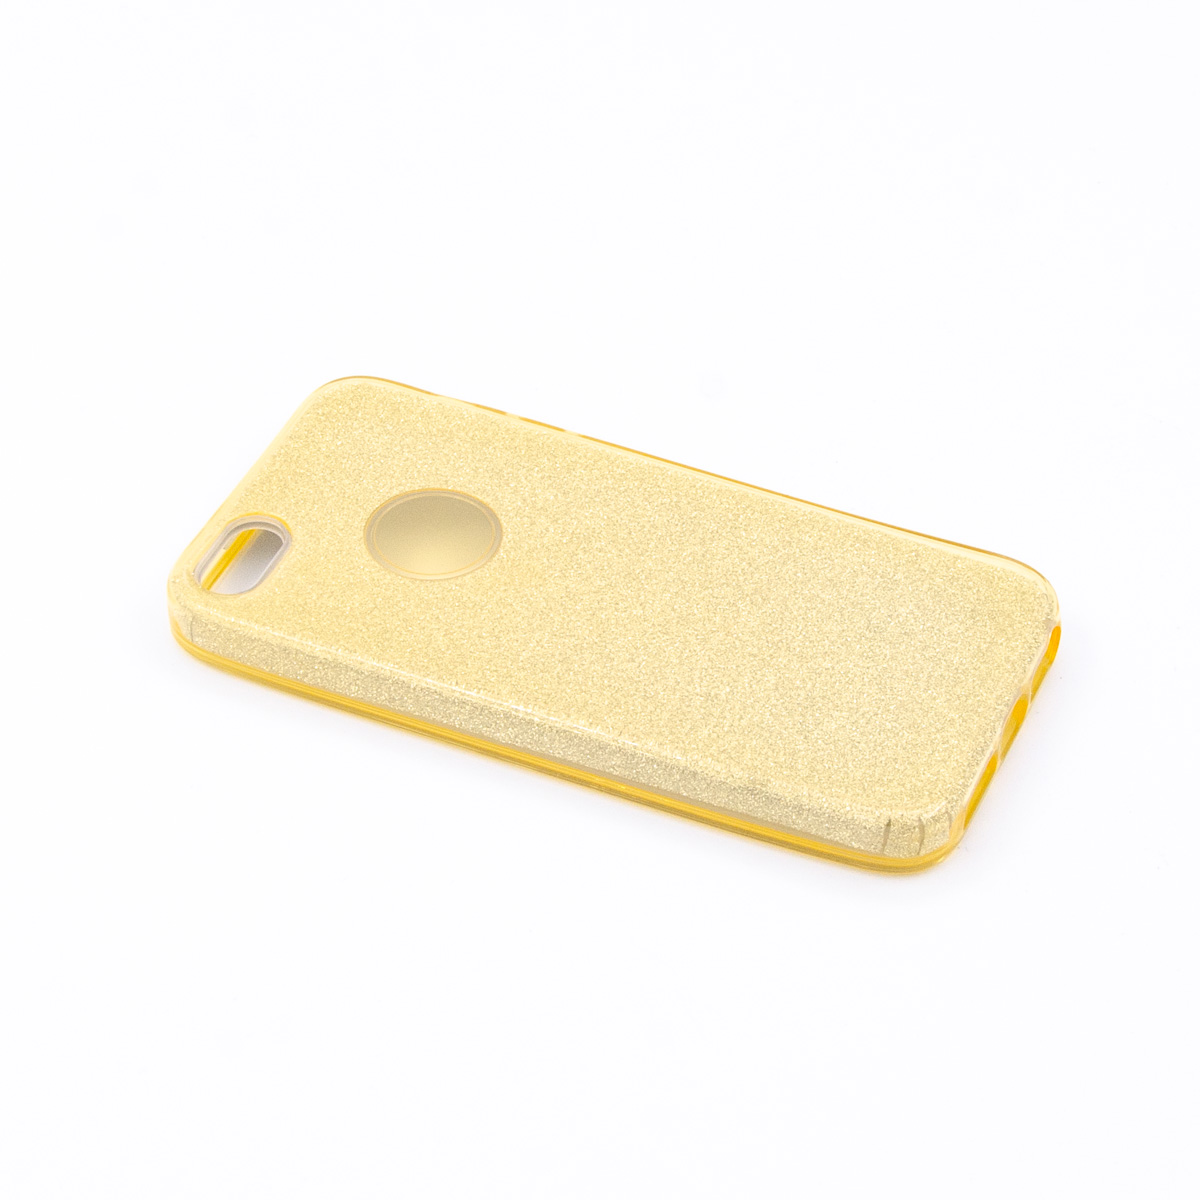 Tpu sparkly shine for iphone 5/5s/se (gold)